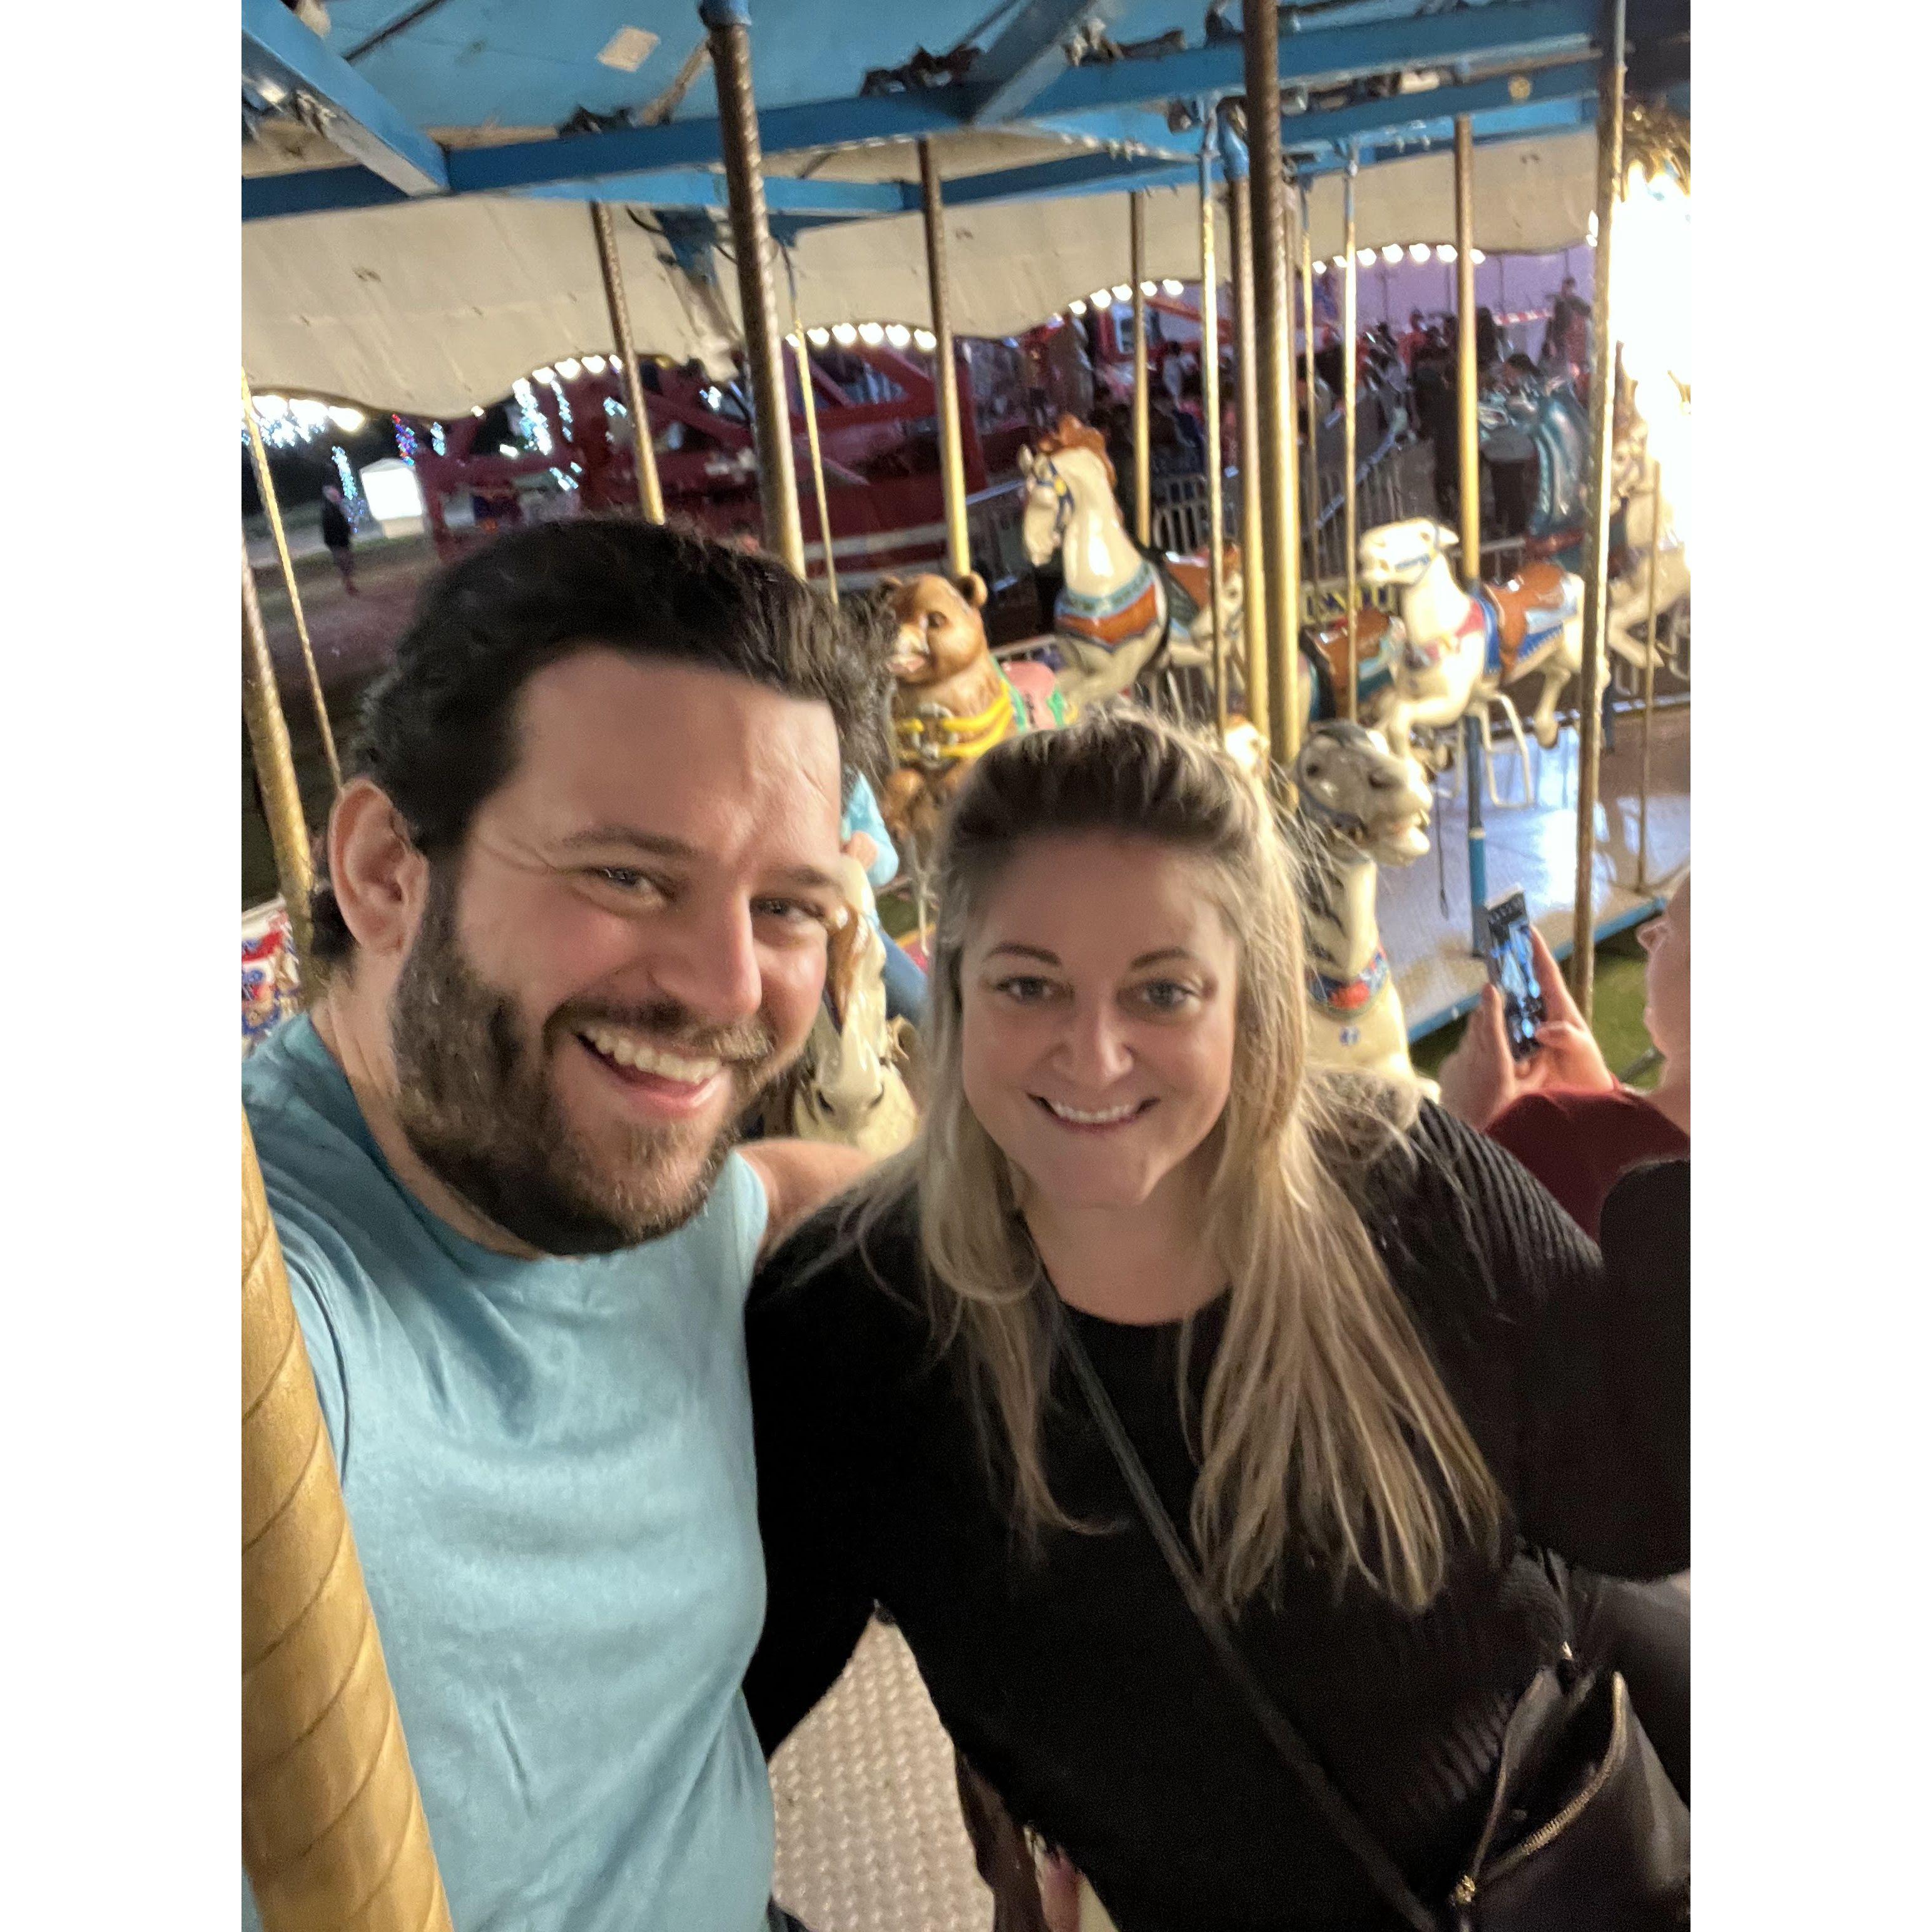 Largo Central Park, Christmas lights and merry go rounds